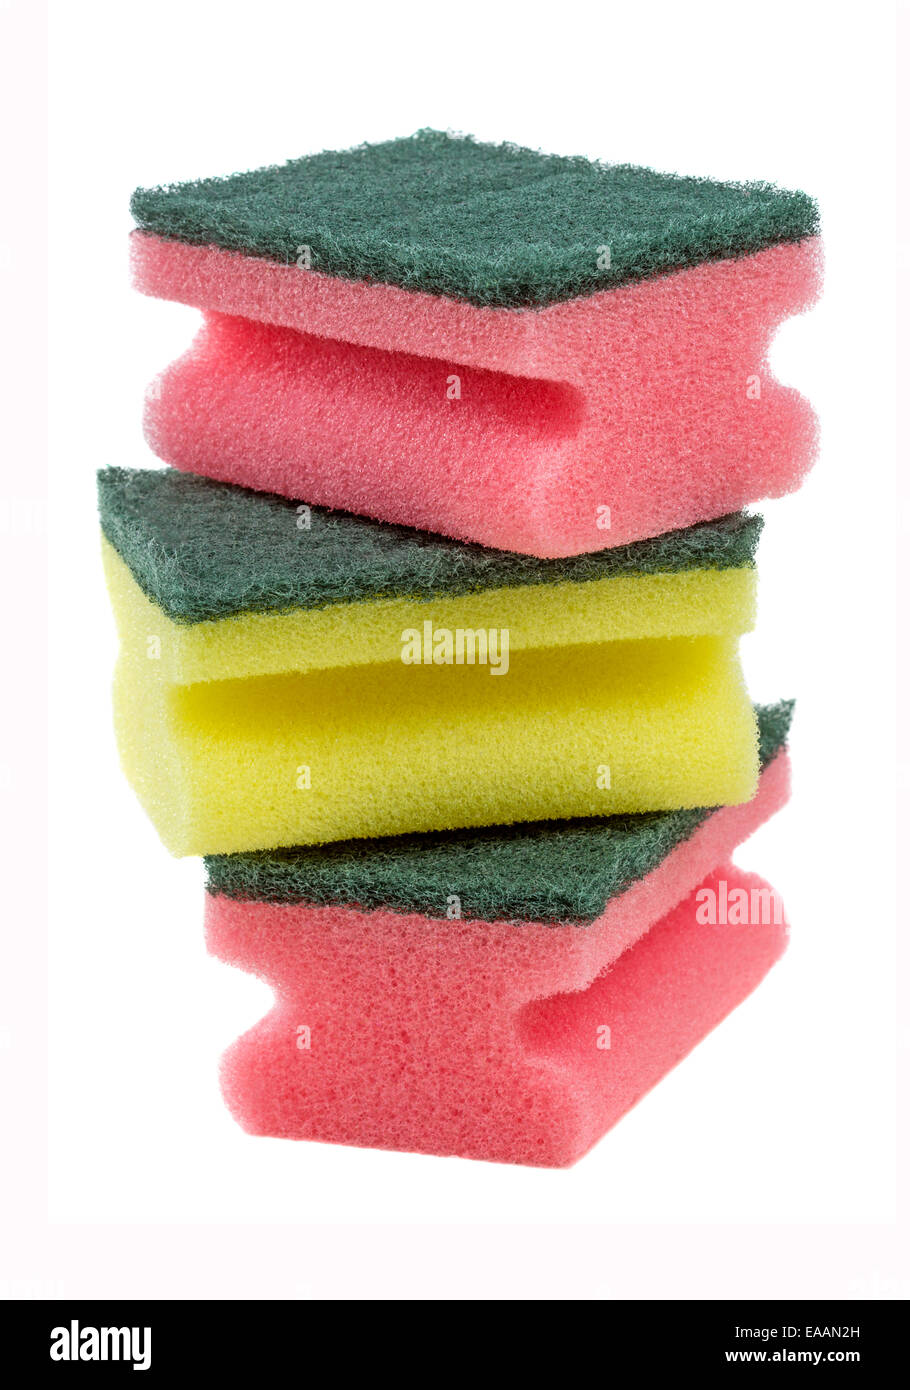 sponges group isolated on the white background Stock Photo